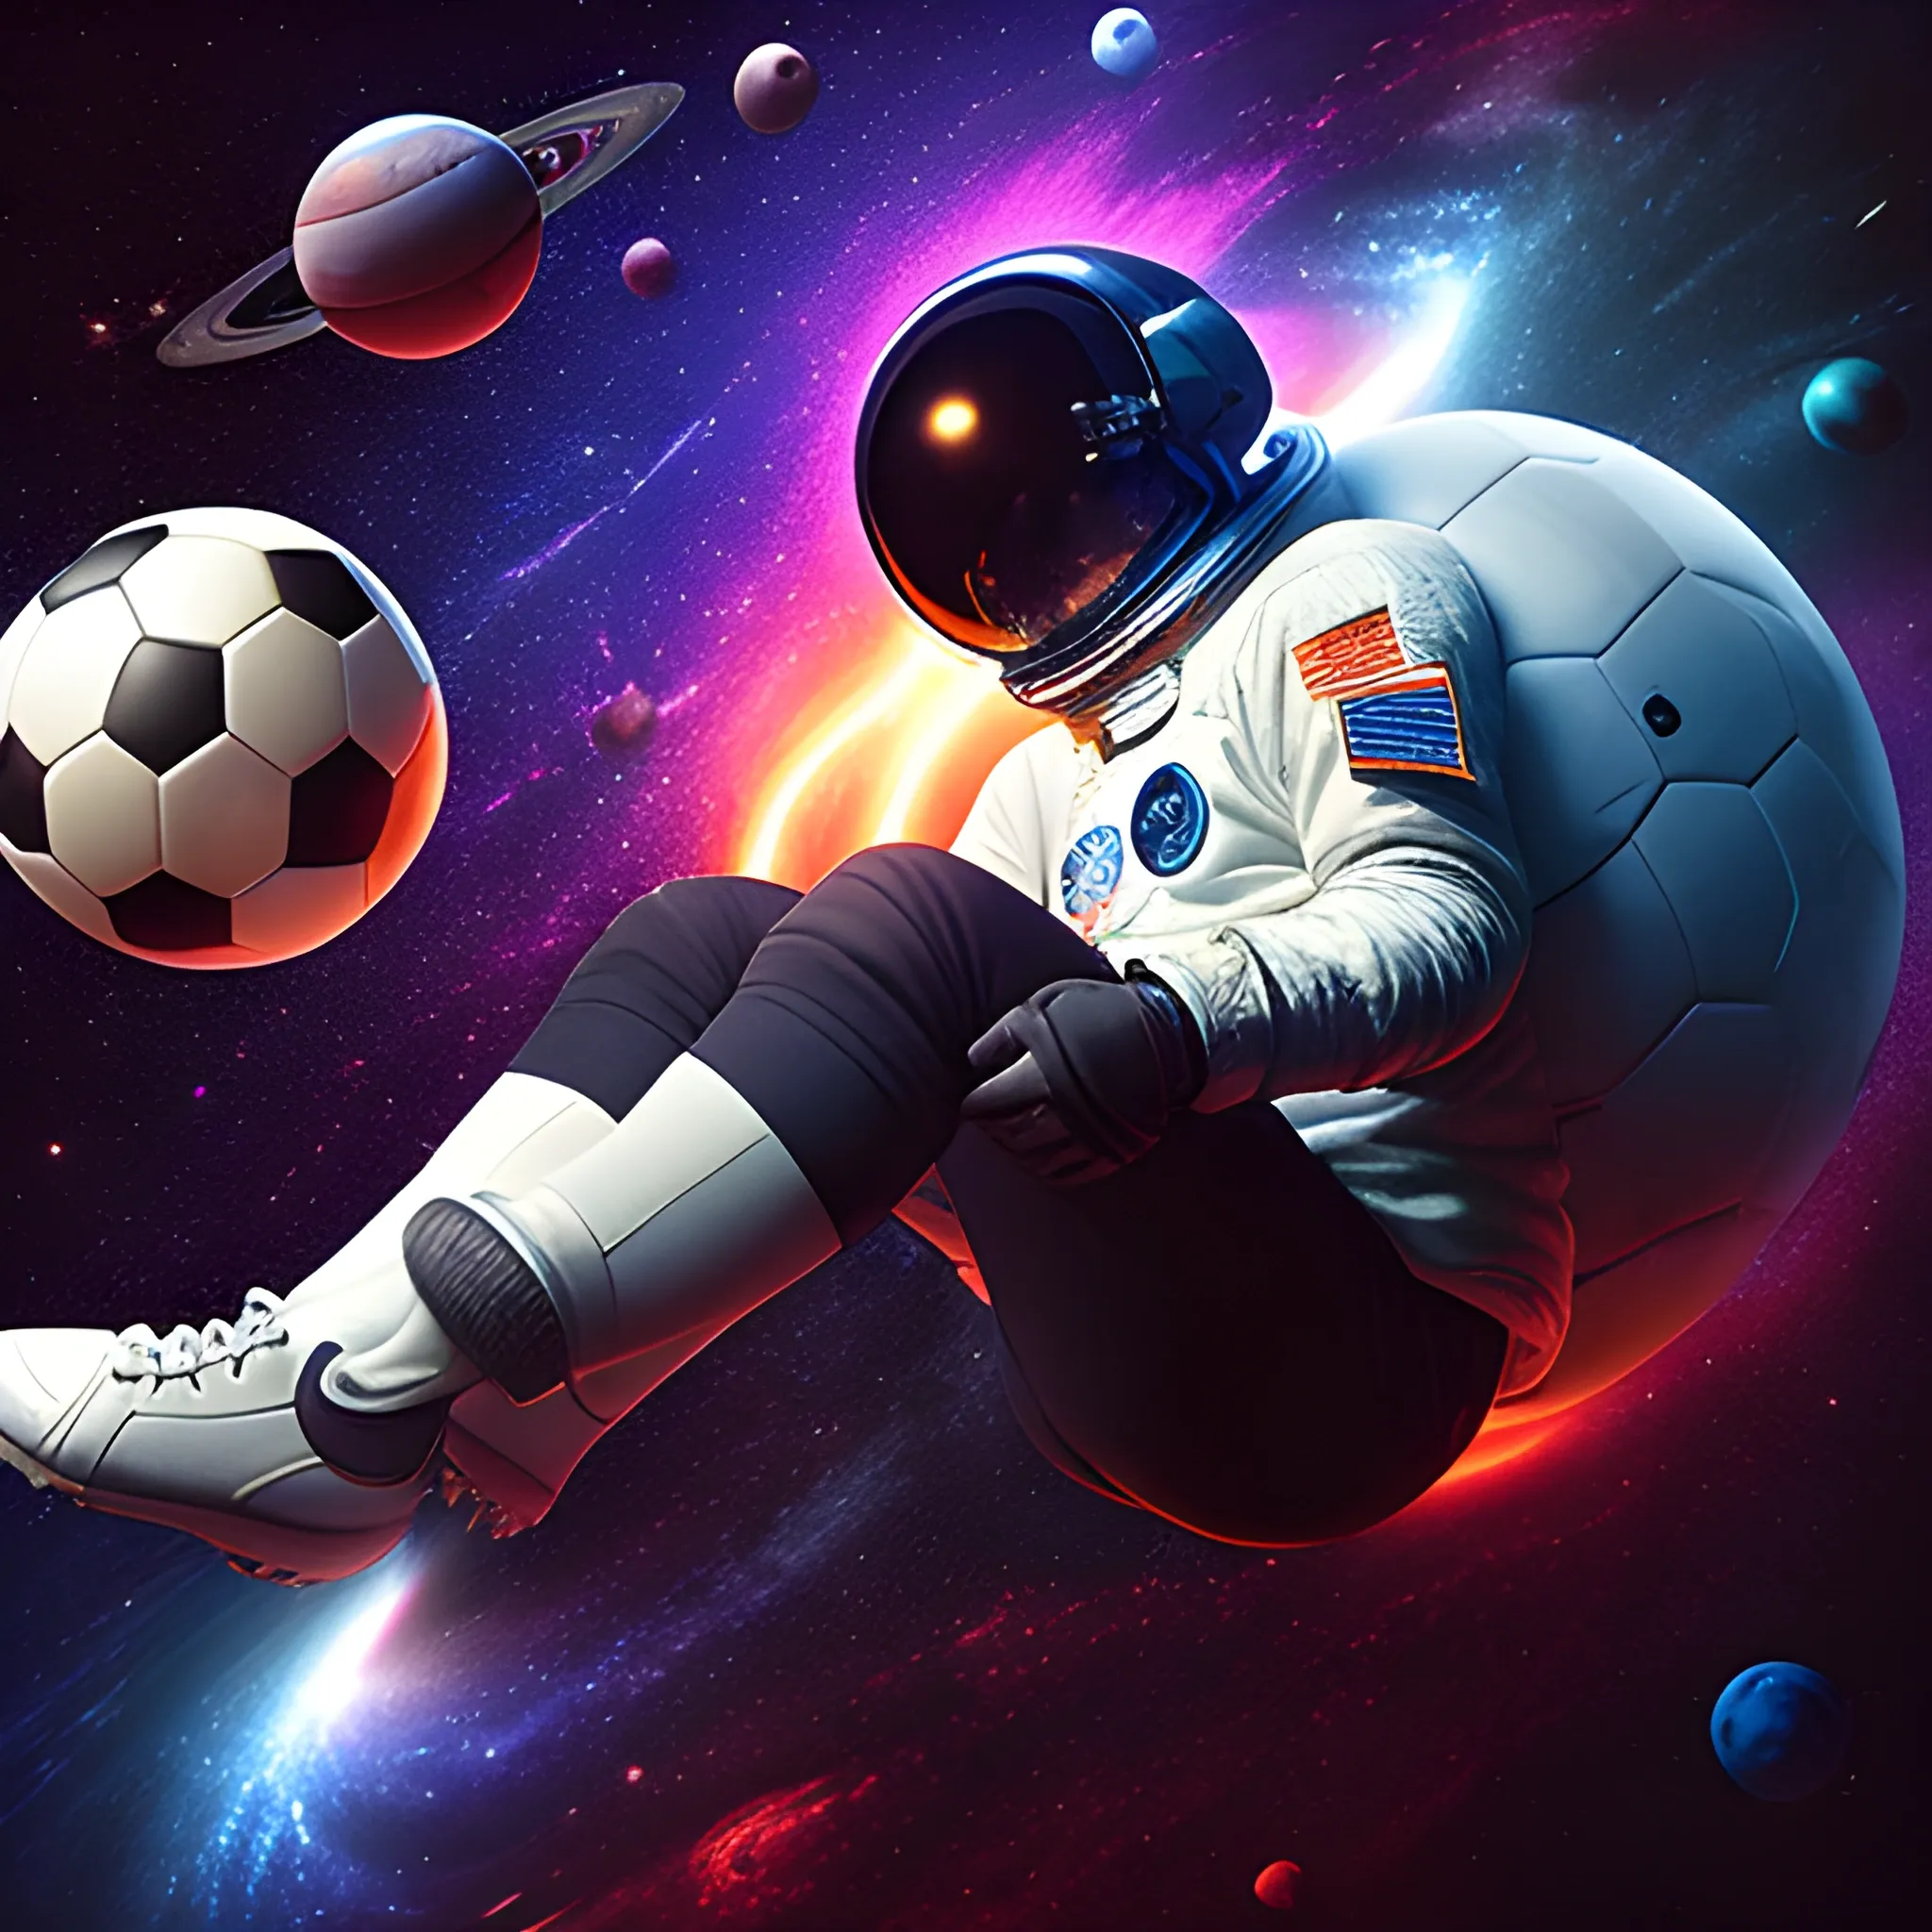 a dark astronaut playing with a soccer ball in foot in a space floating, planets, and beautiful galaxy view, tripping

